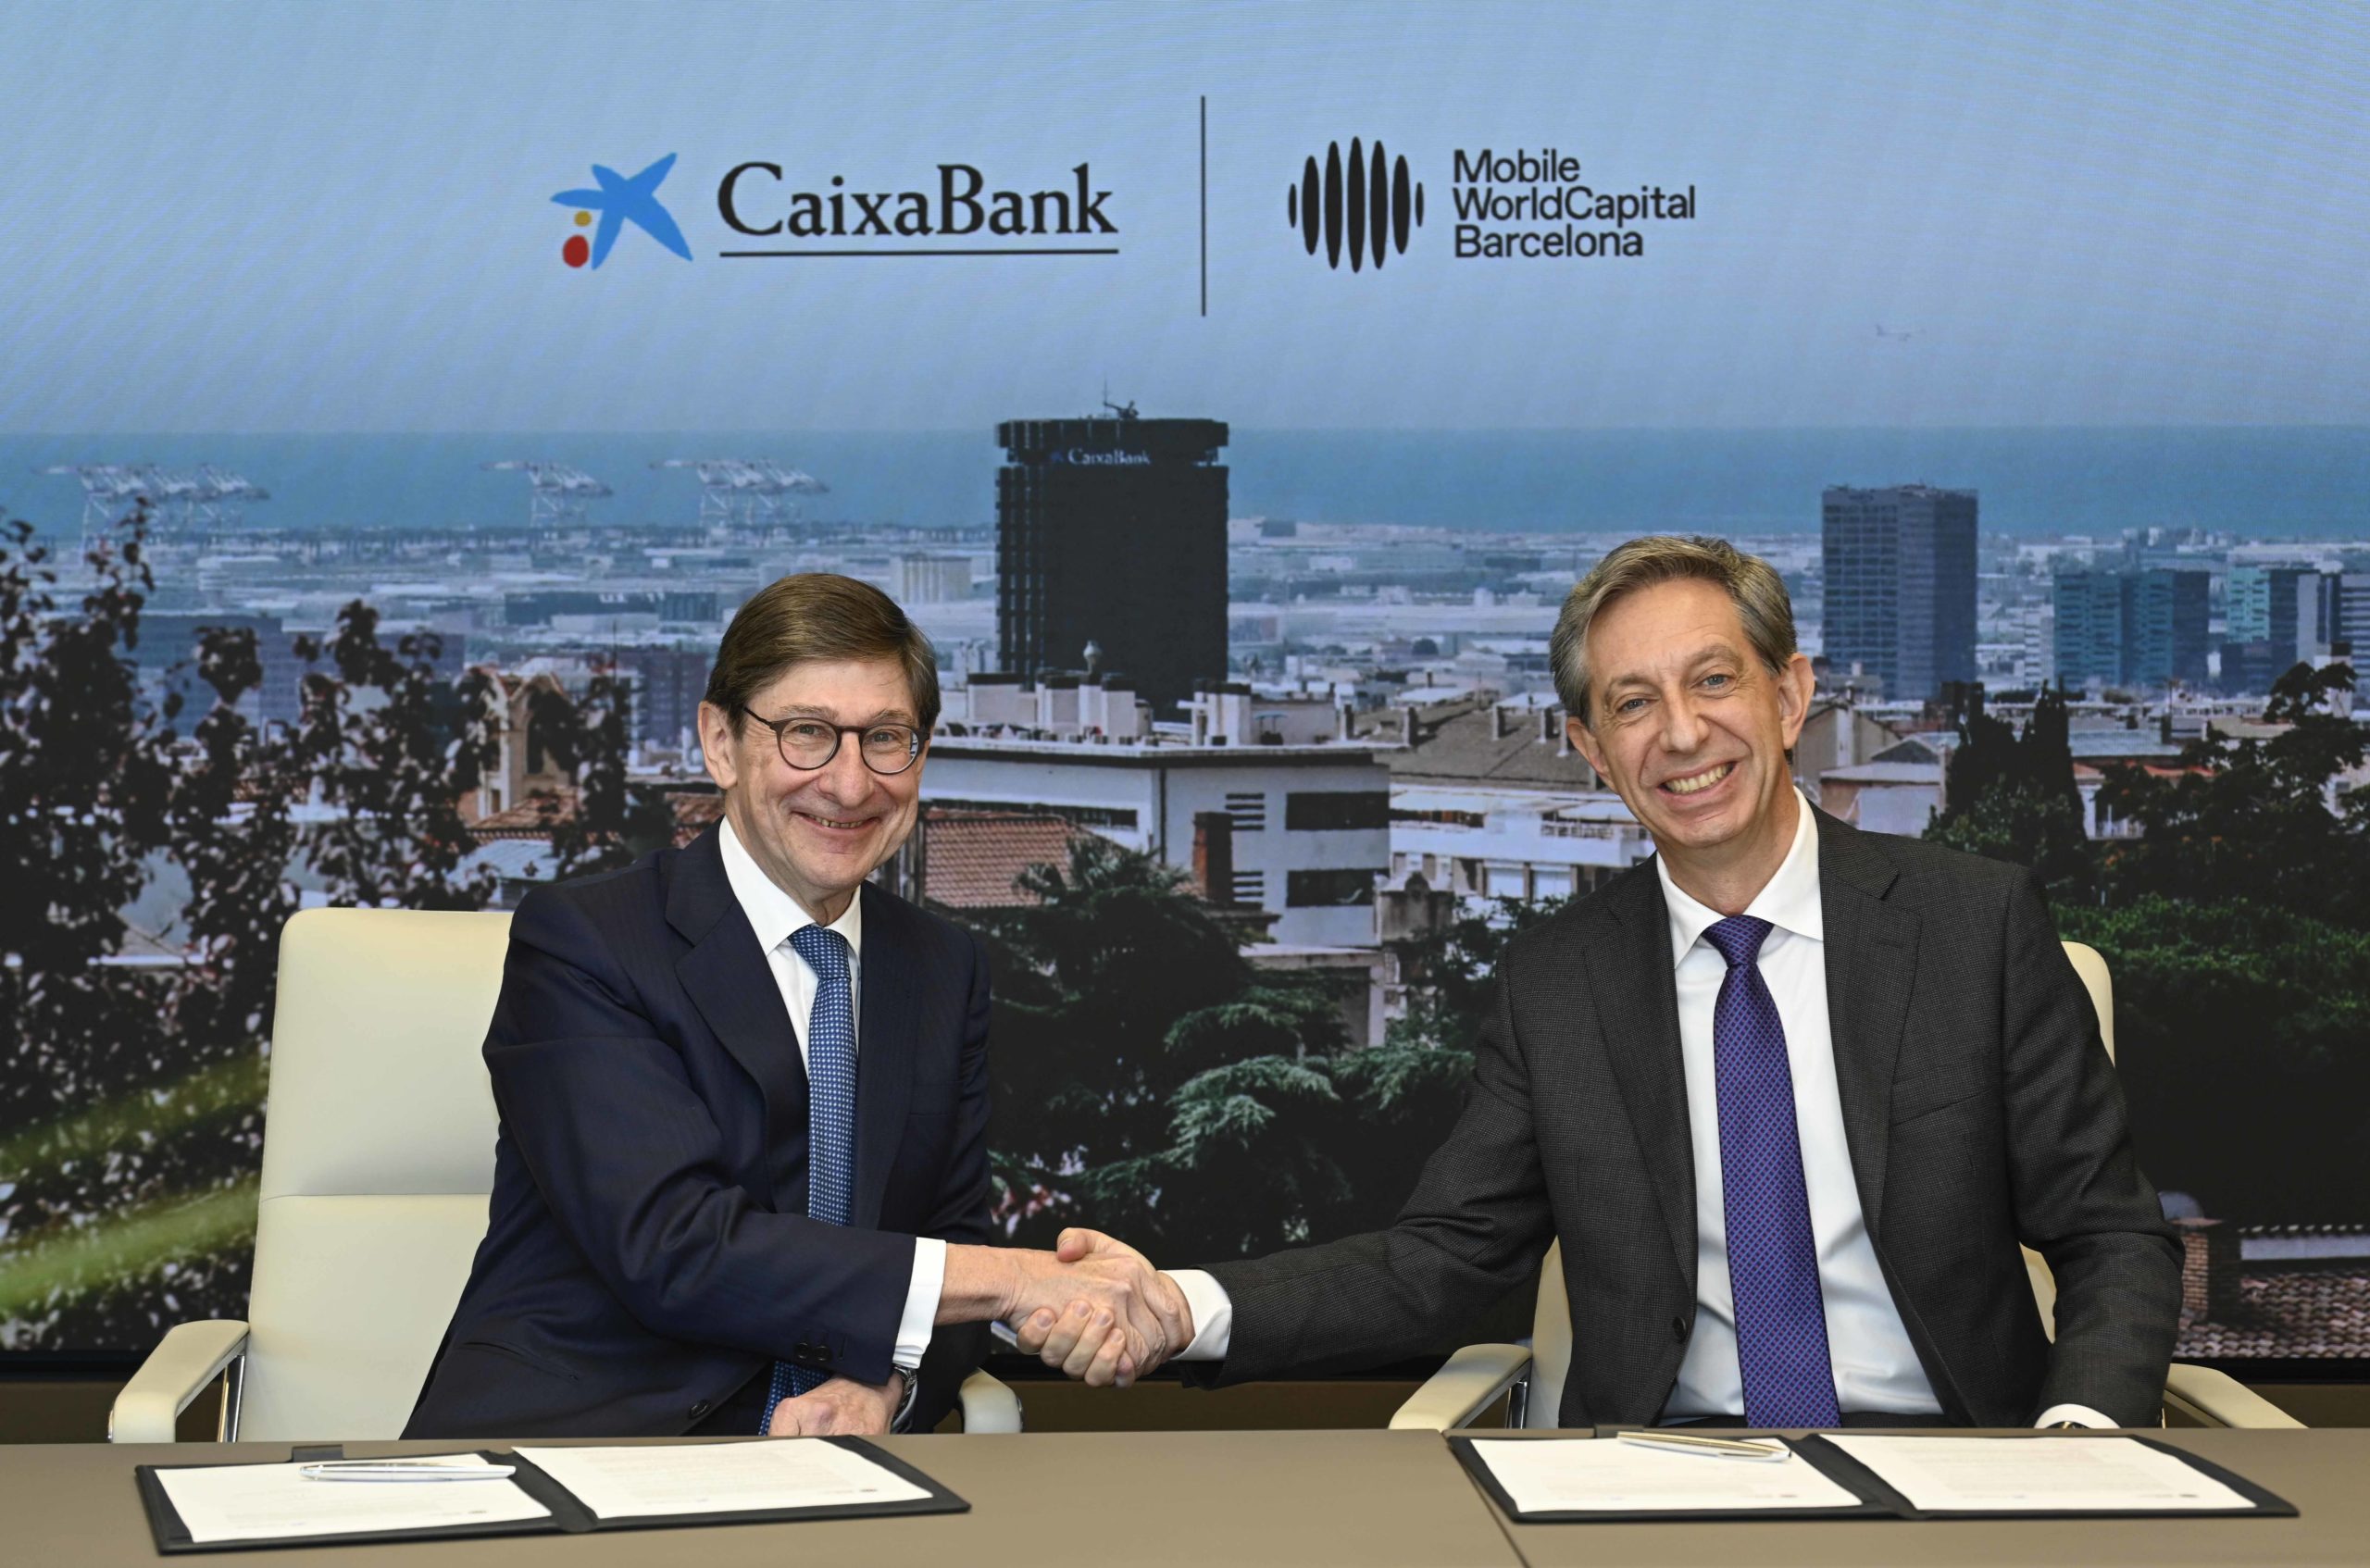 CaixaBank and MWCapital commit to maximize the social impact of technology